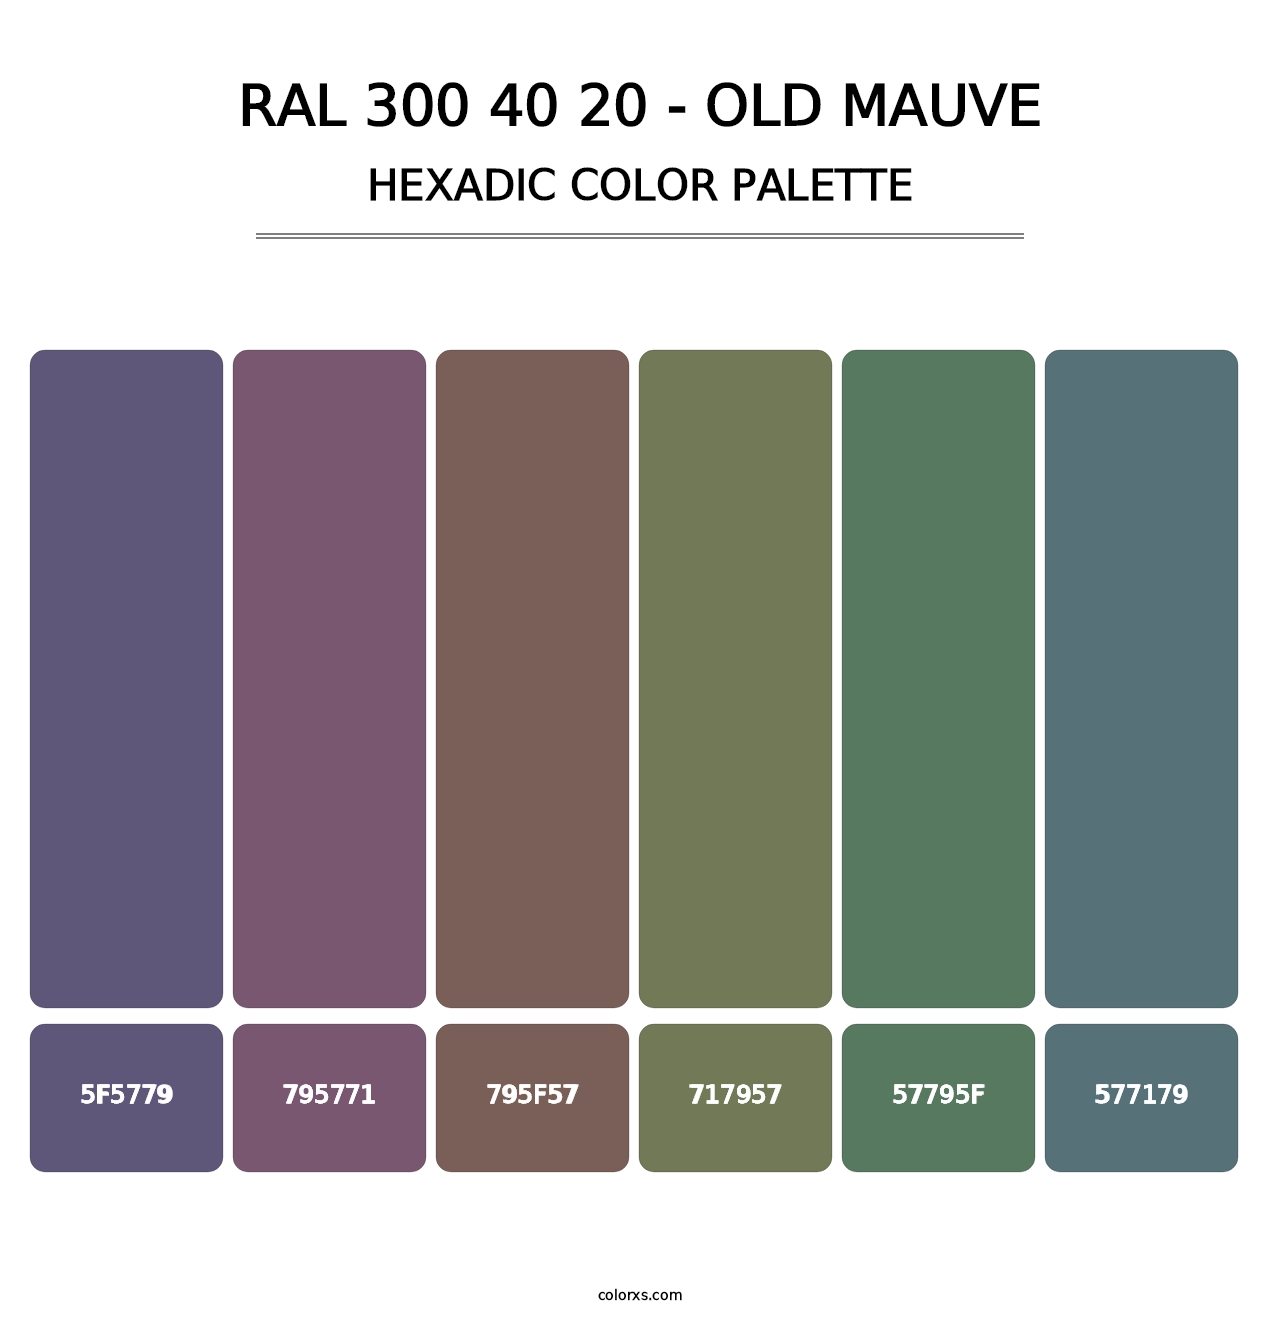 RAL 300 40 20 - Old Mauve - Hexadic Color Palette